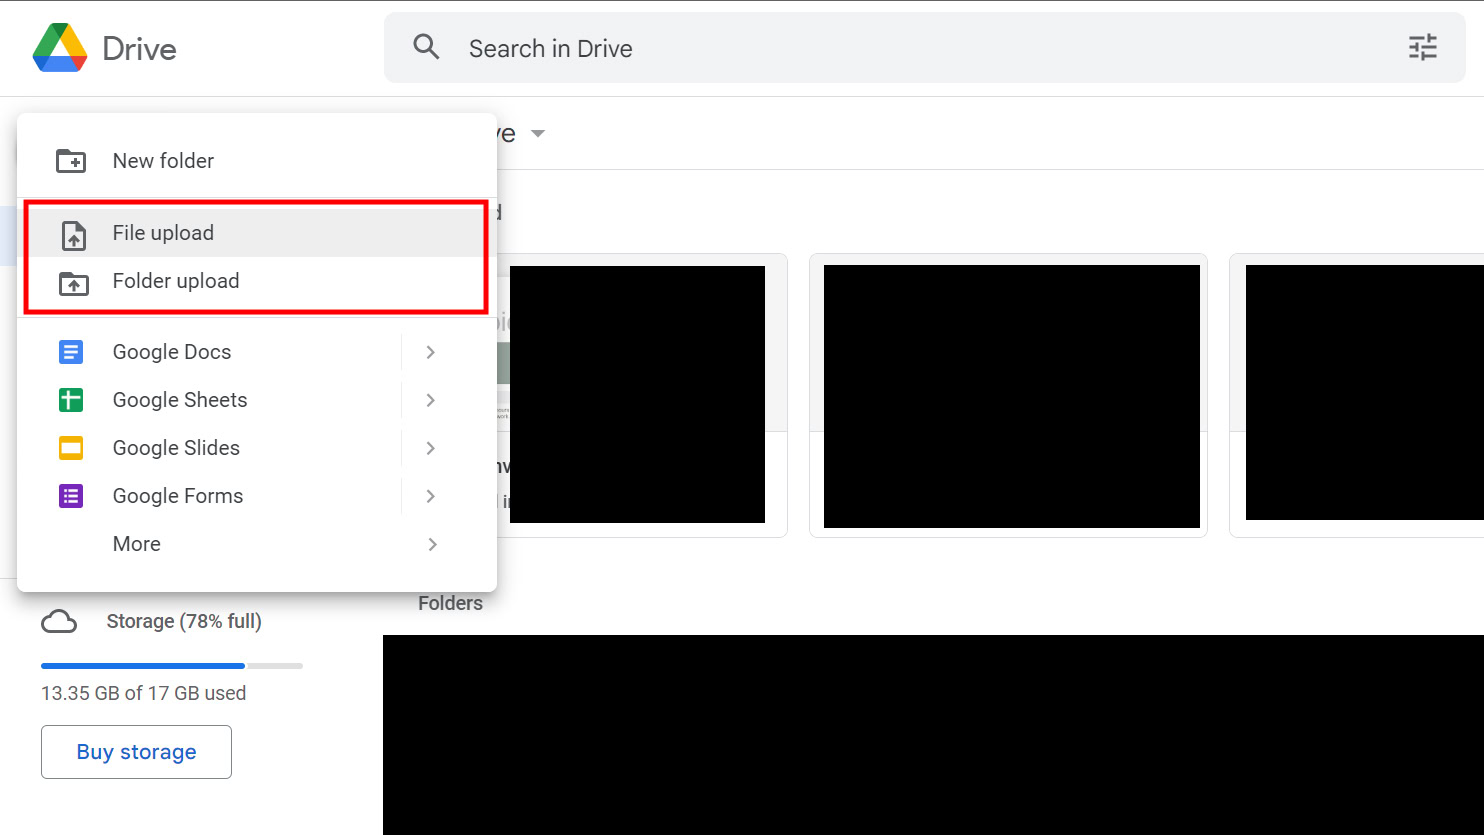 How to Share Your Google Drive (Step-by-Step)